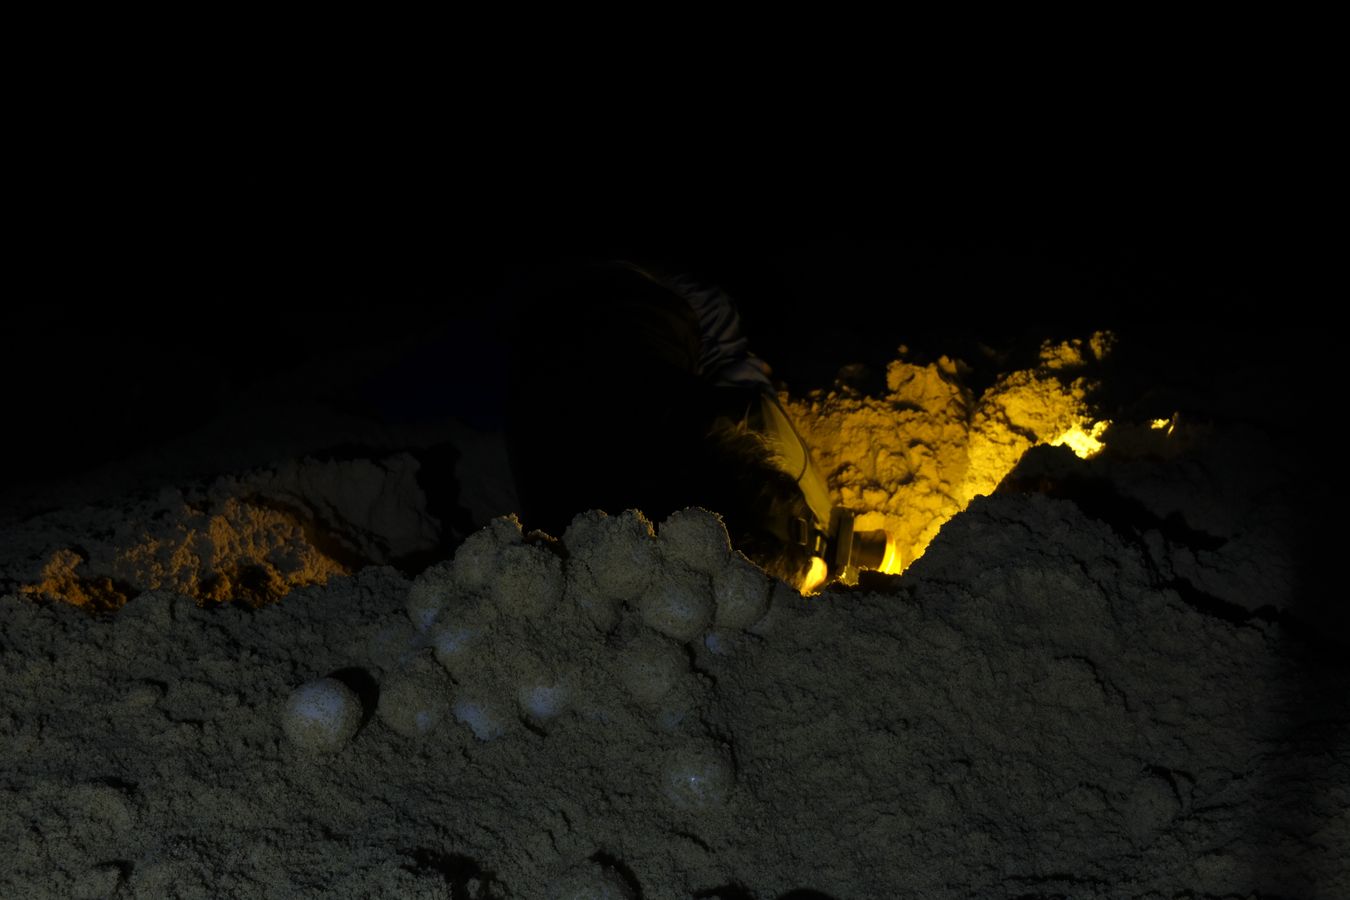 Late at night, ranger removes green turtle eggs from nest to transfer to their new nest at the hatchery.